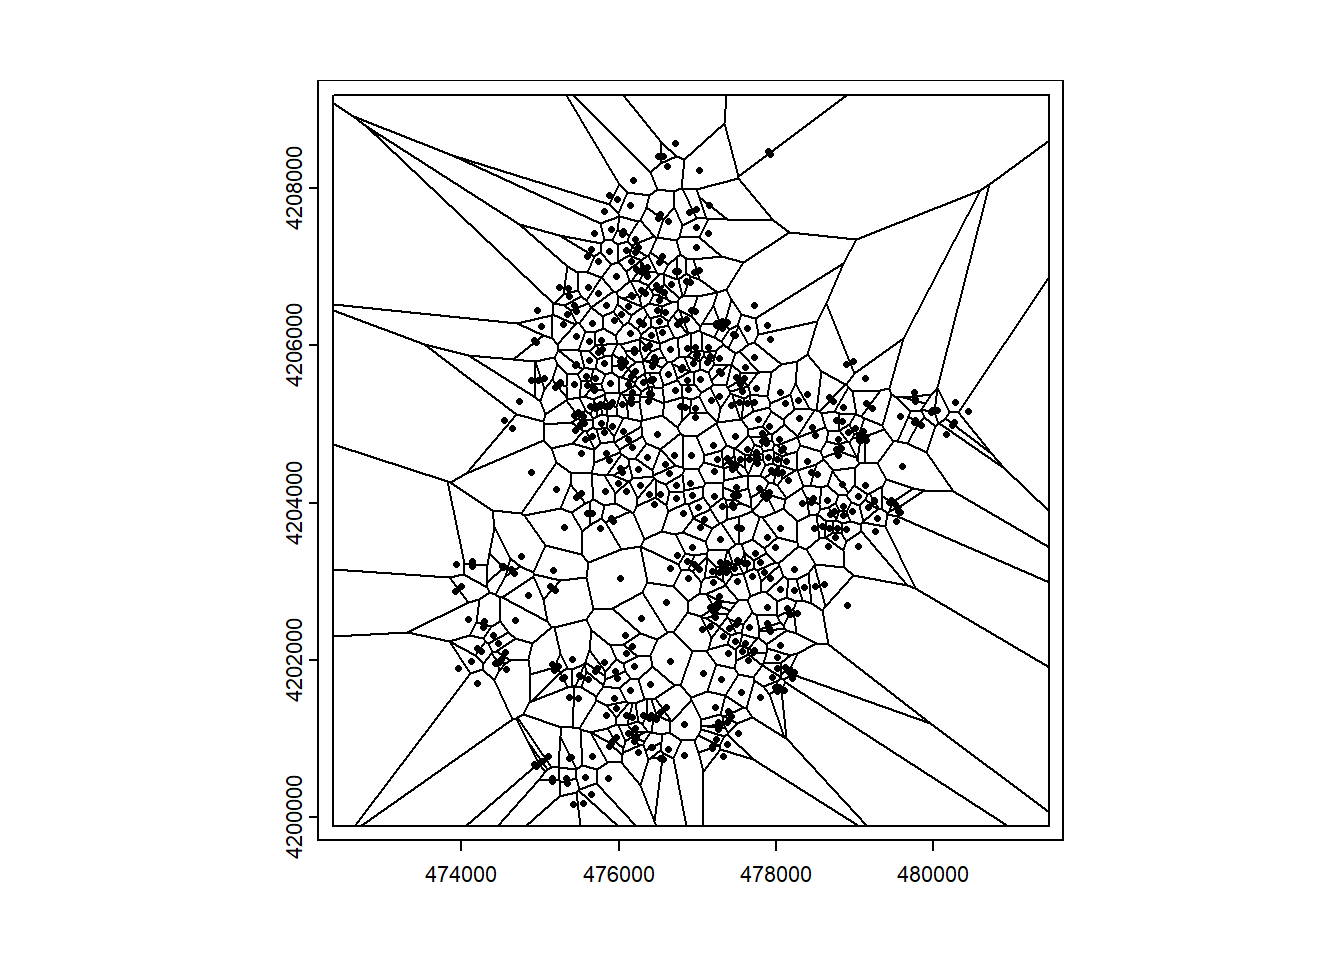 Left: Voronoi diagram corresponding to the observation locations. Right: Predictions obtained using the closest observation criterion.